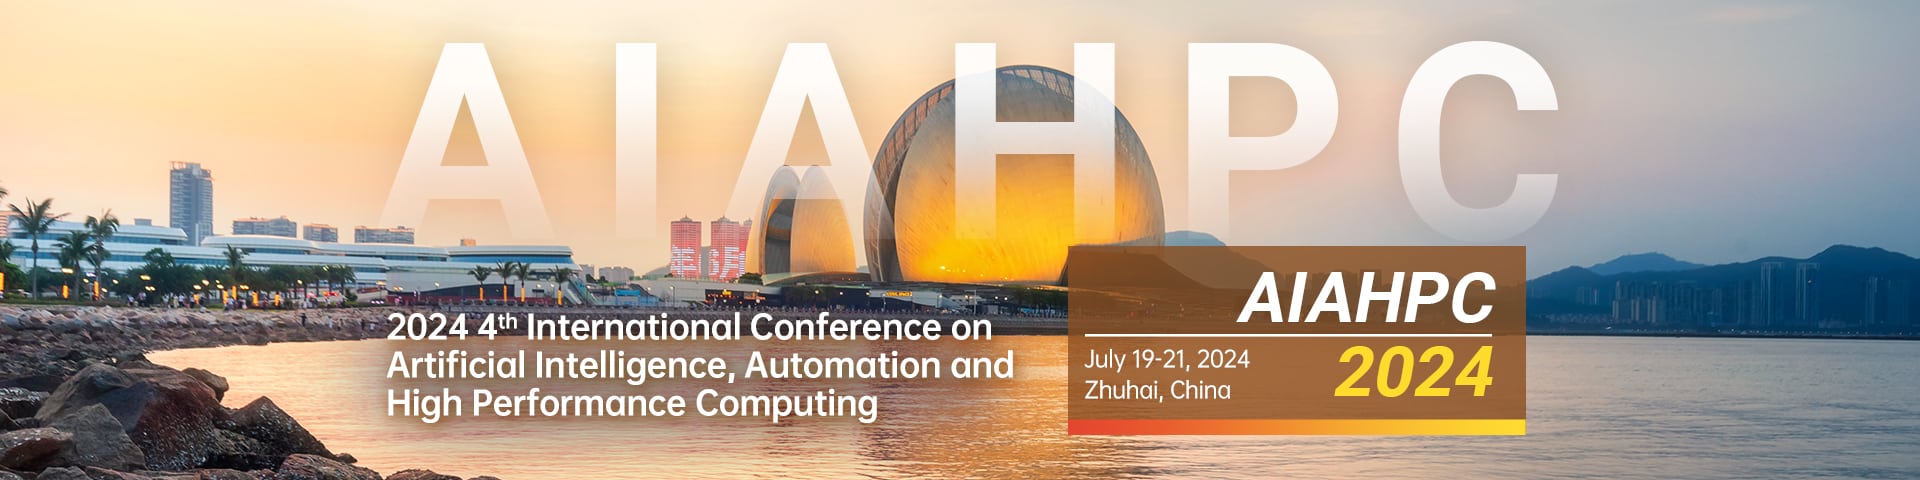 2024 4th International Conference on Artificial Intelligence, Automation and High Performance Computing (AIAHPC 2024)